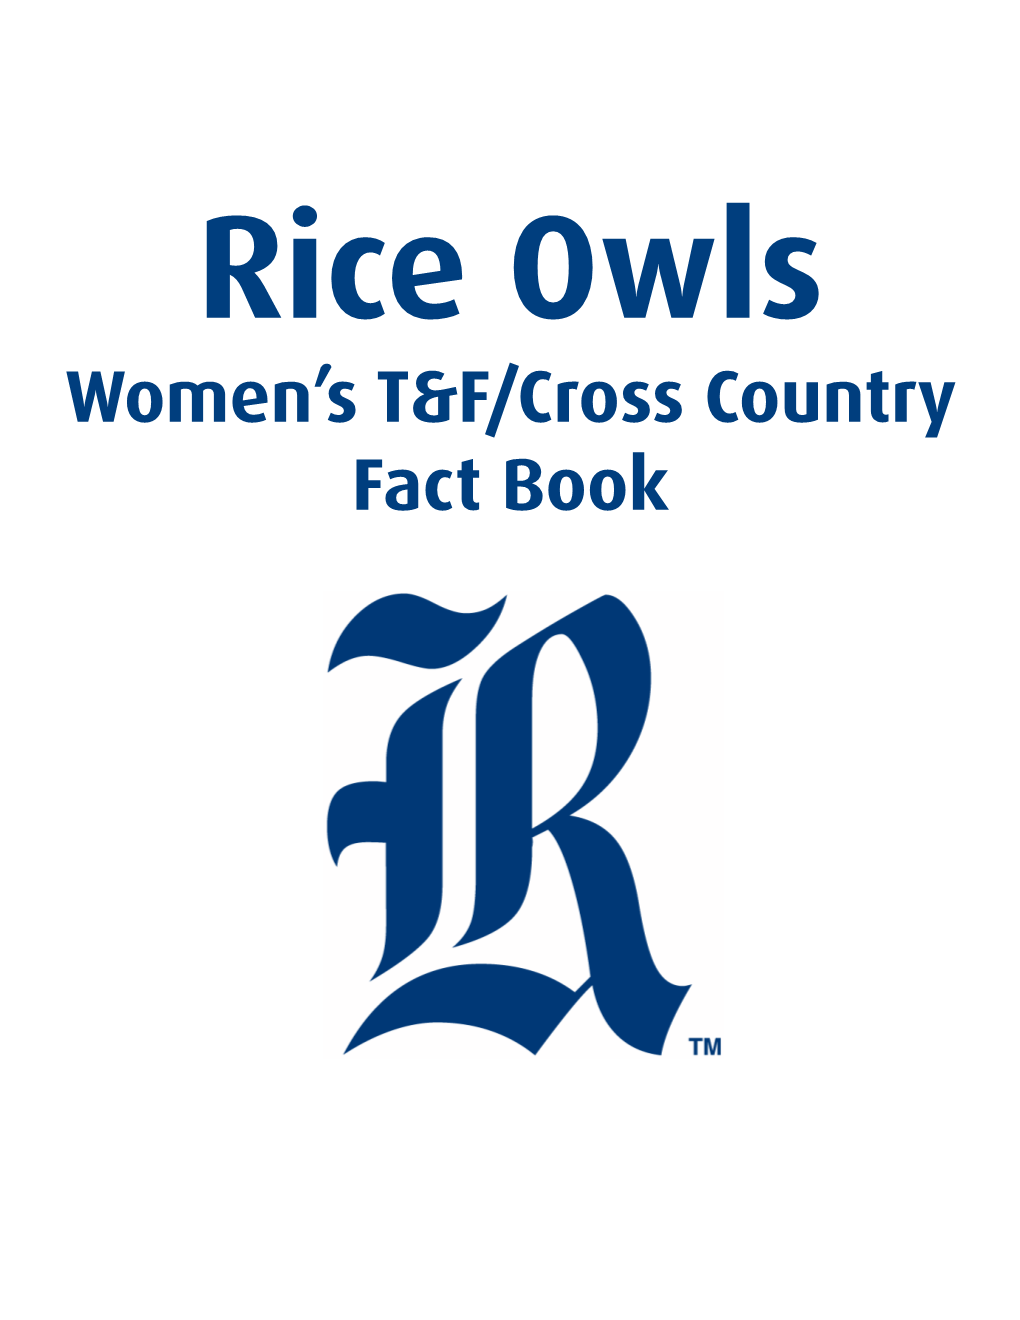 Women's T&F/Cross Country Fact Book